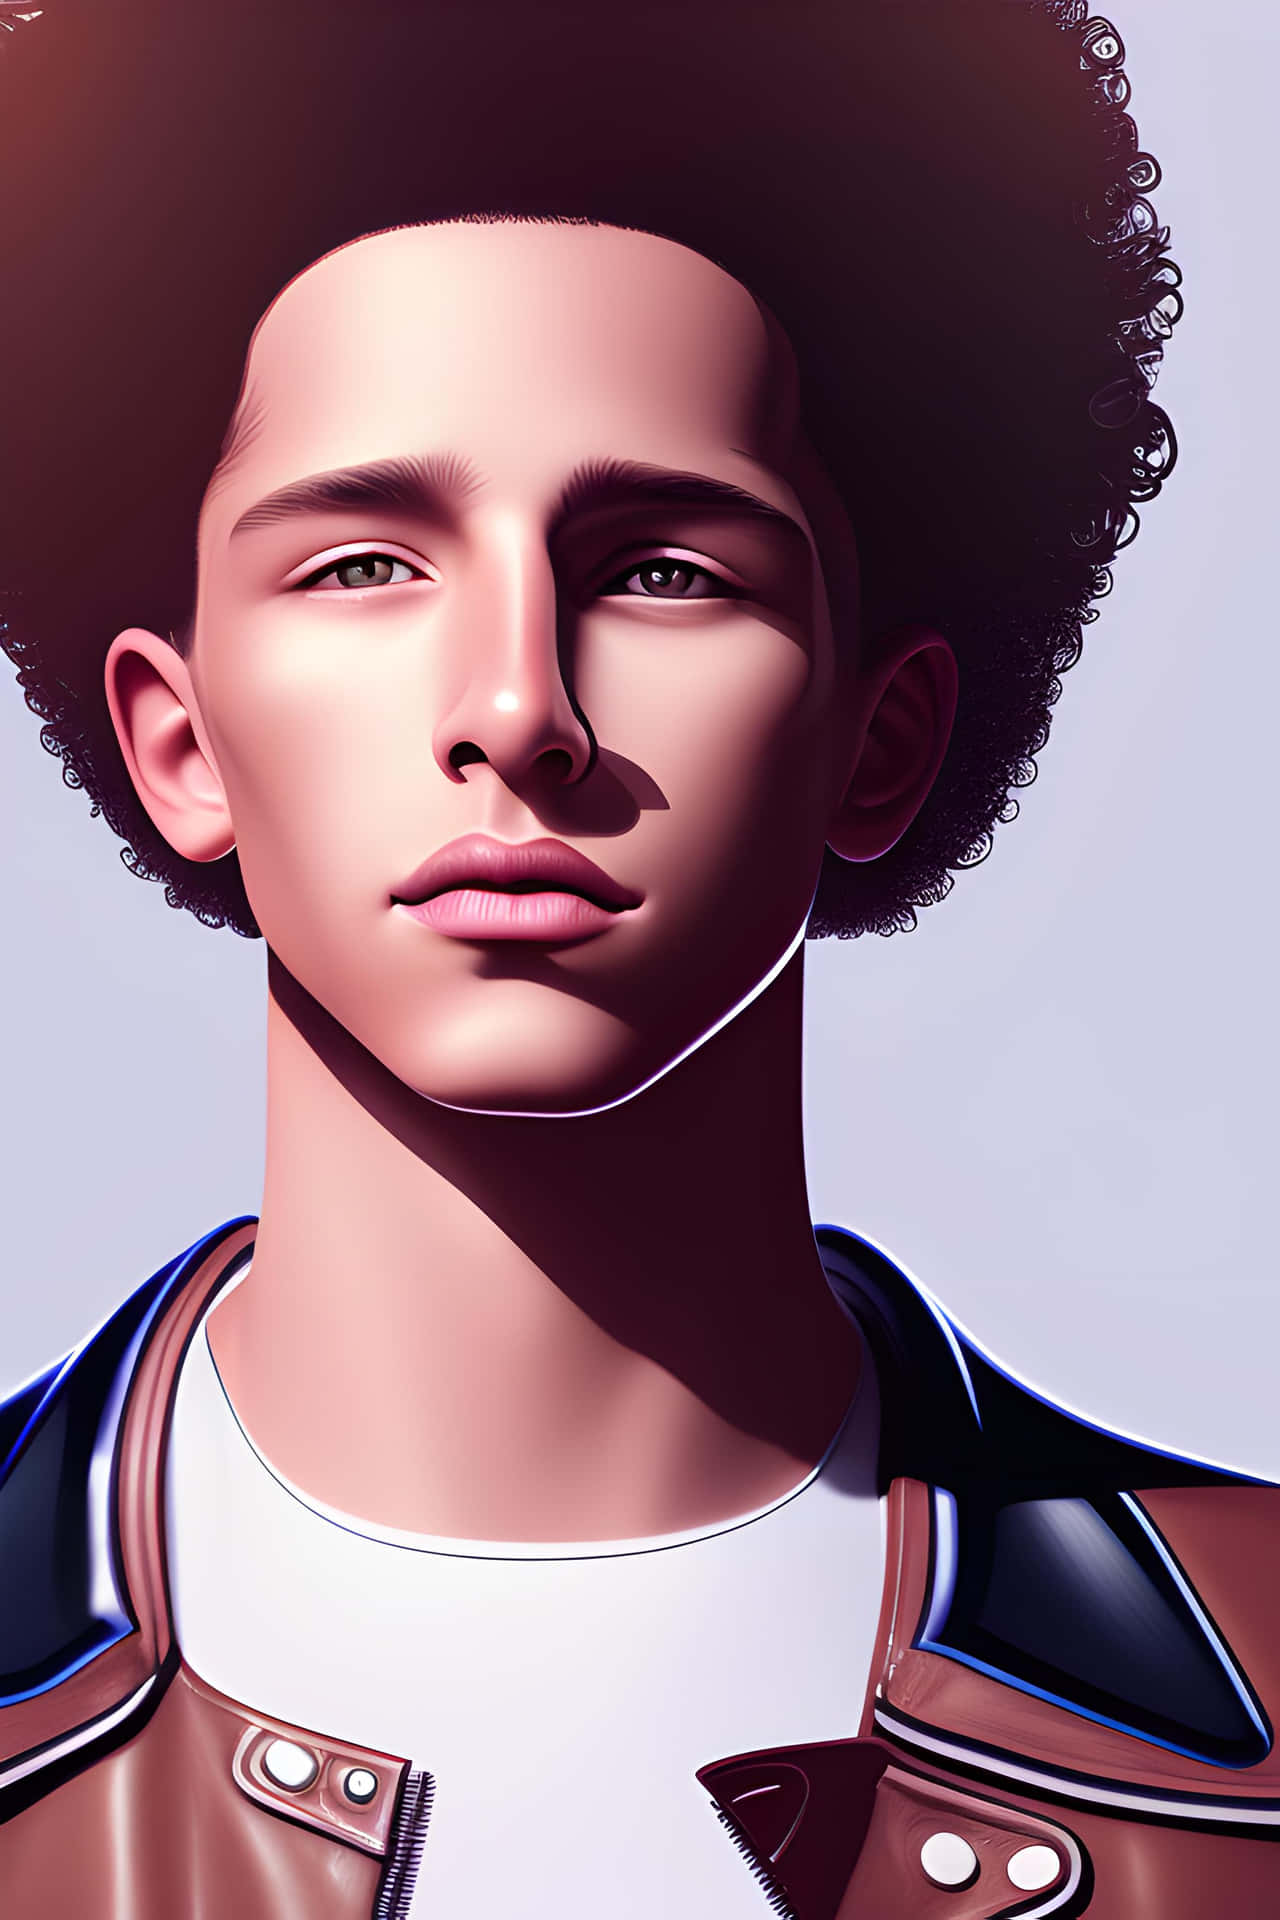 Curly Haired Boy Illustration Wallpaper